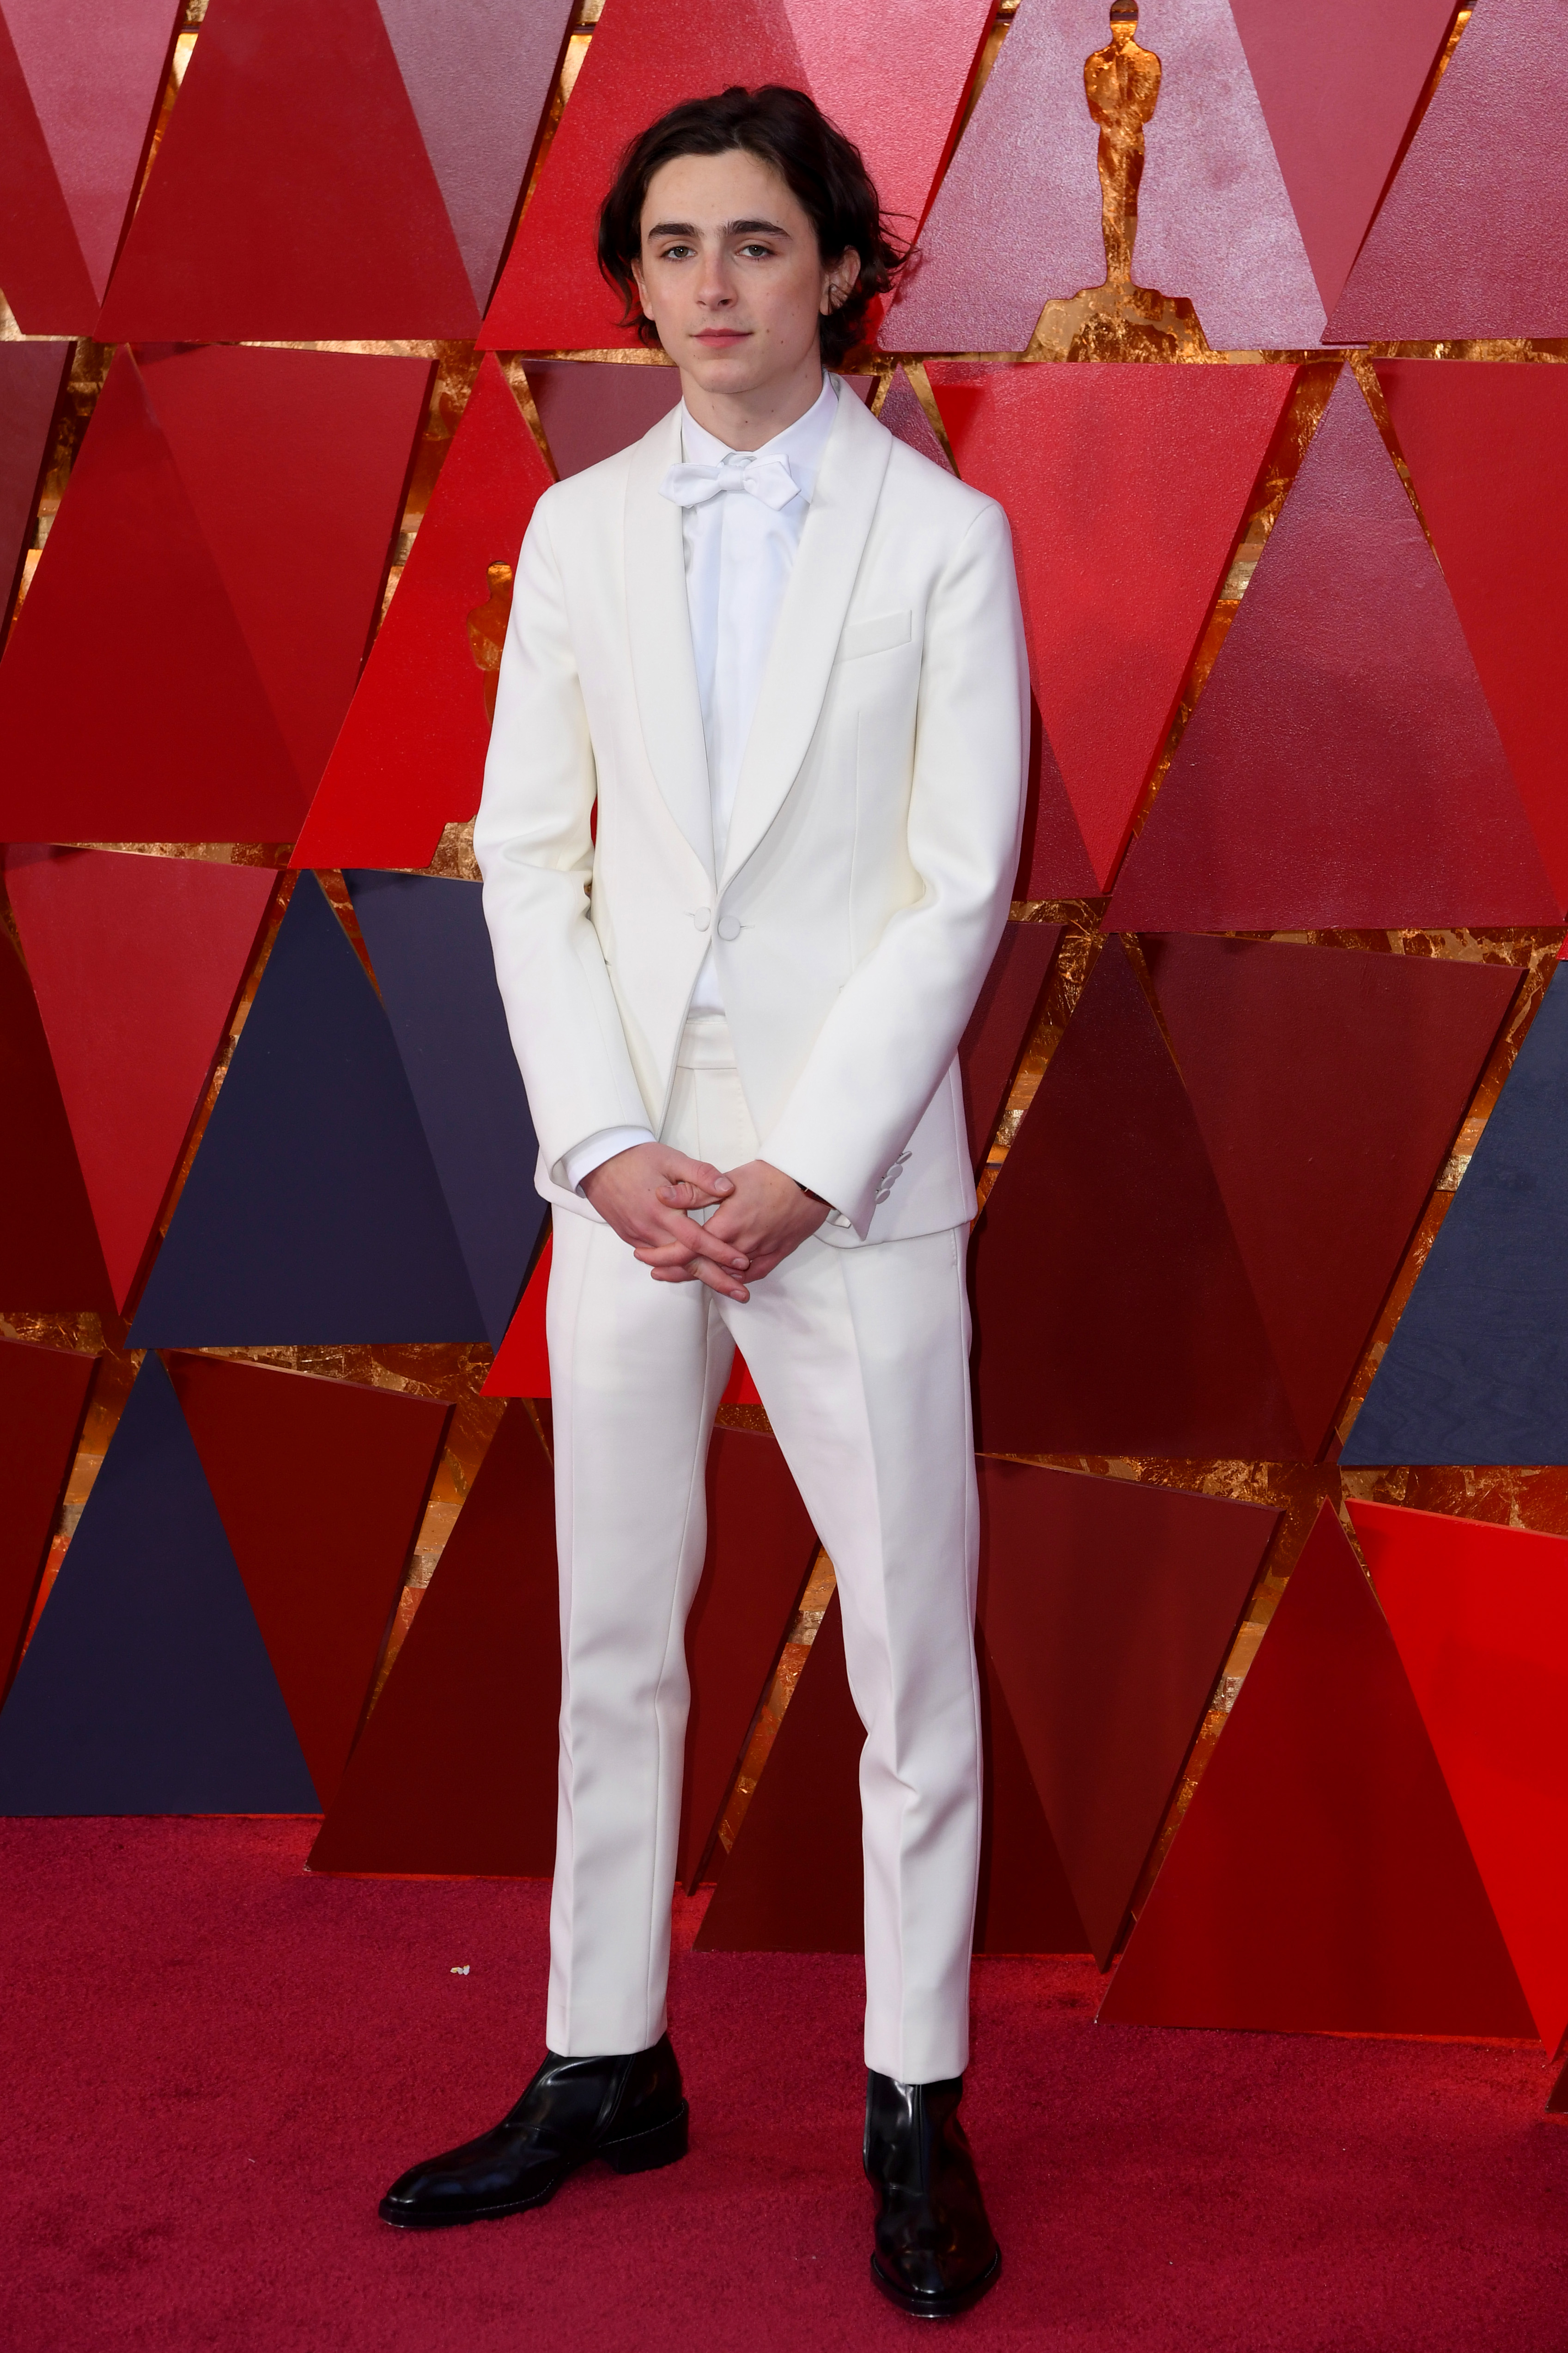 Timothee Chalamet Red Carpet Photos: Actor's Hottest Moments